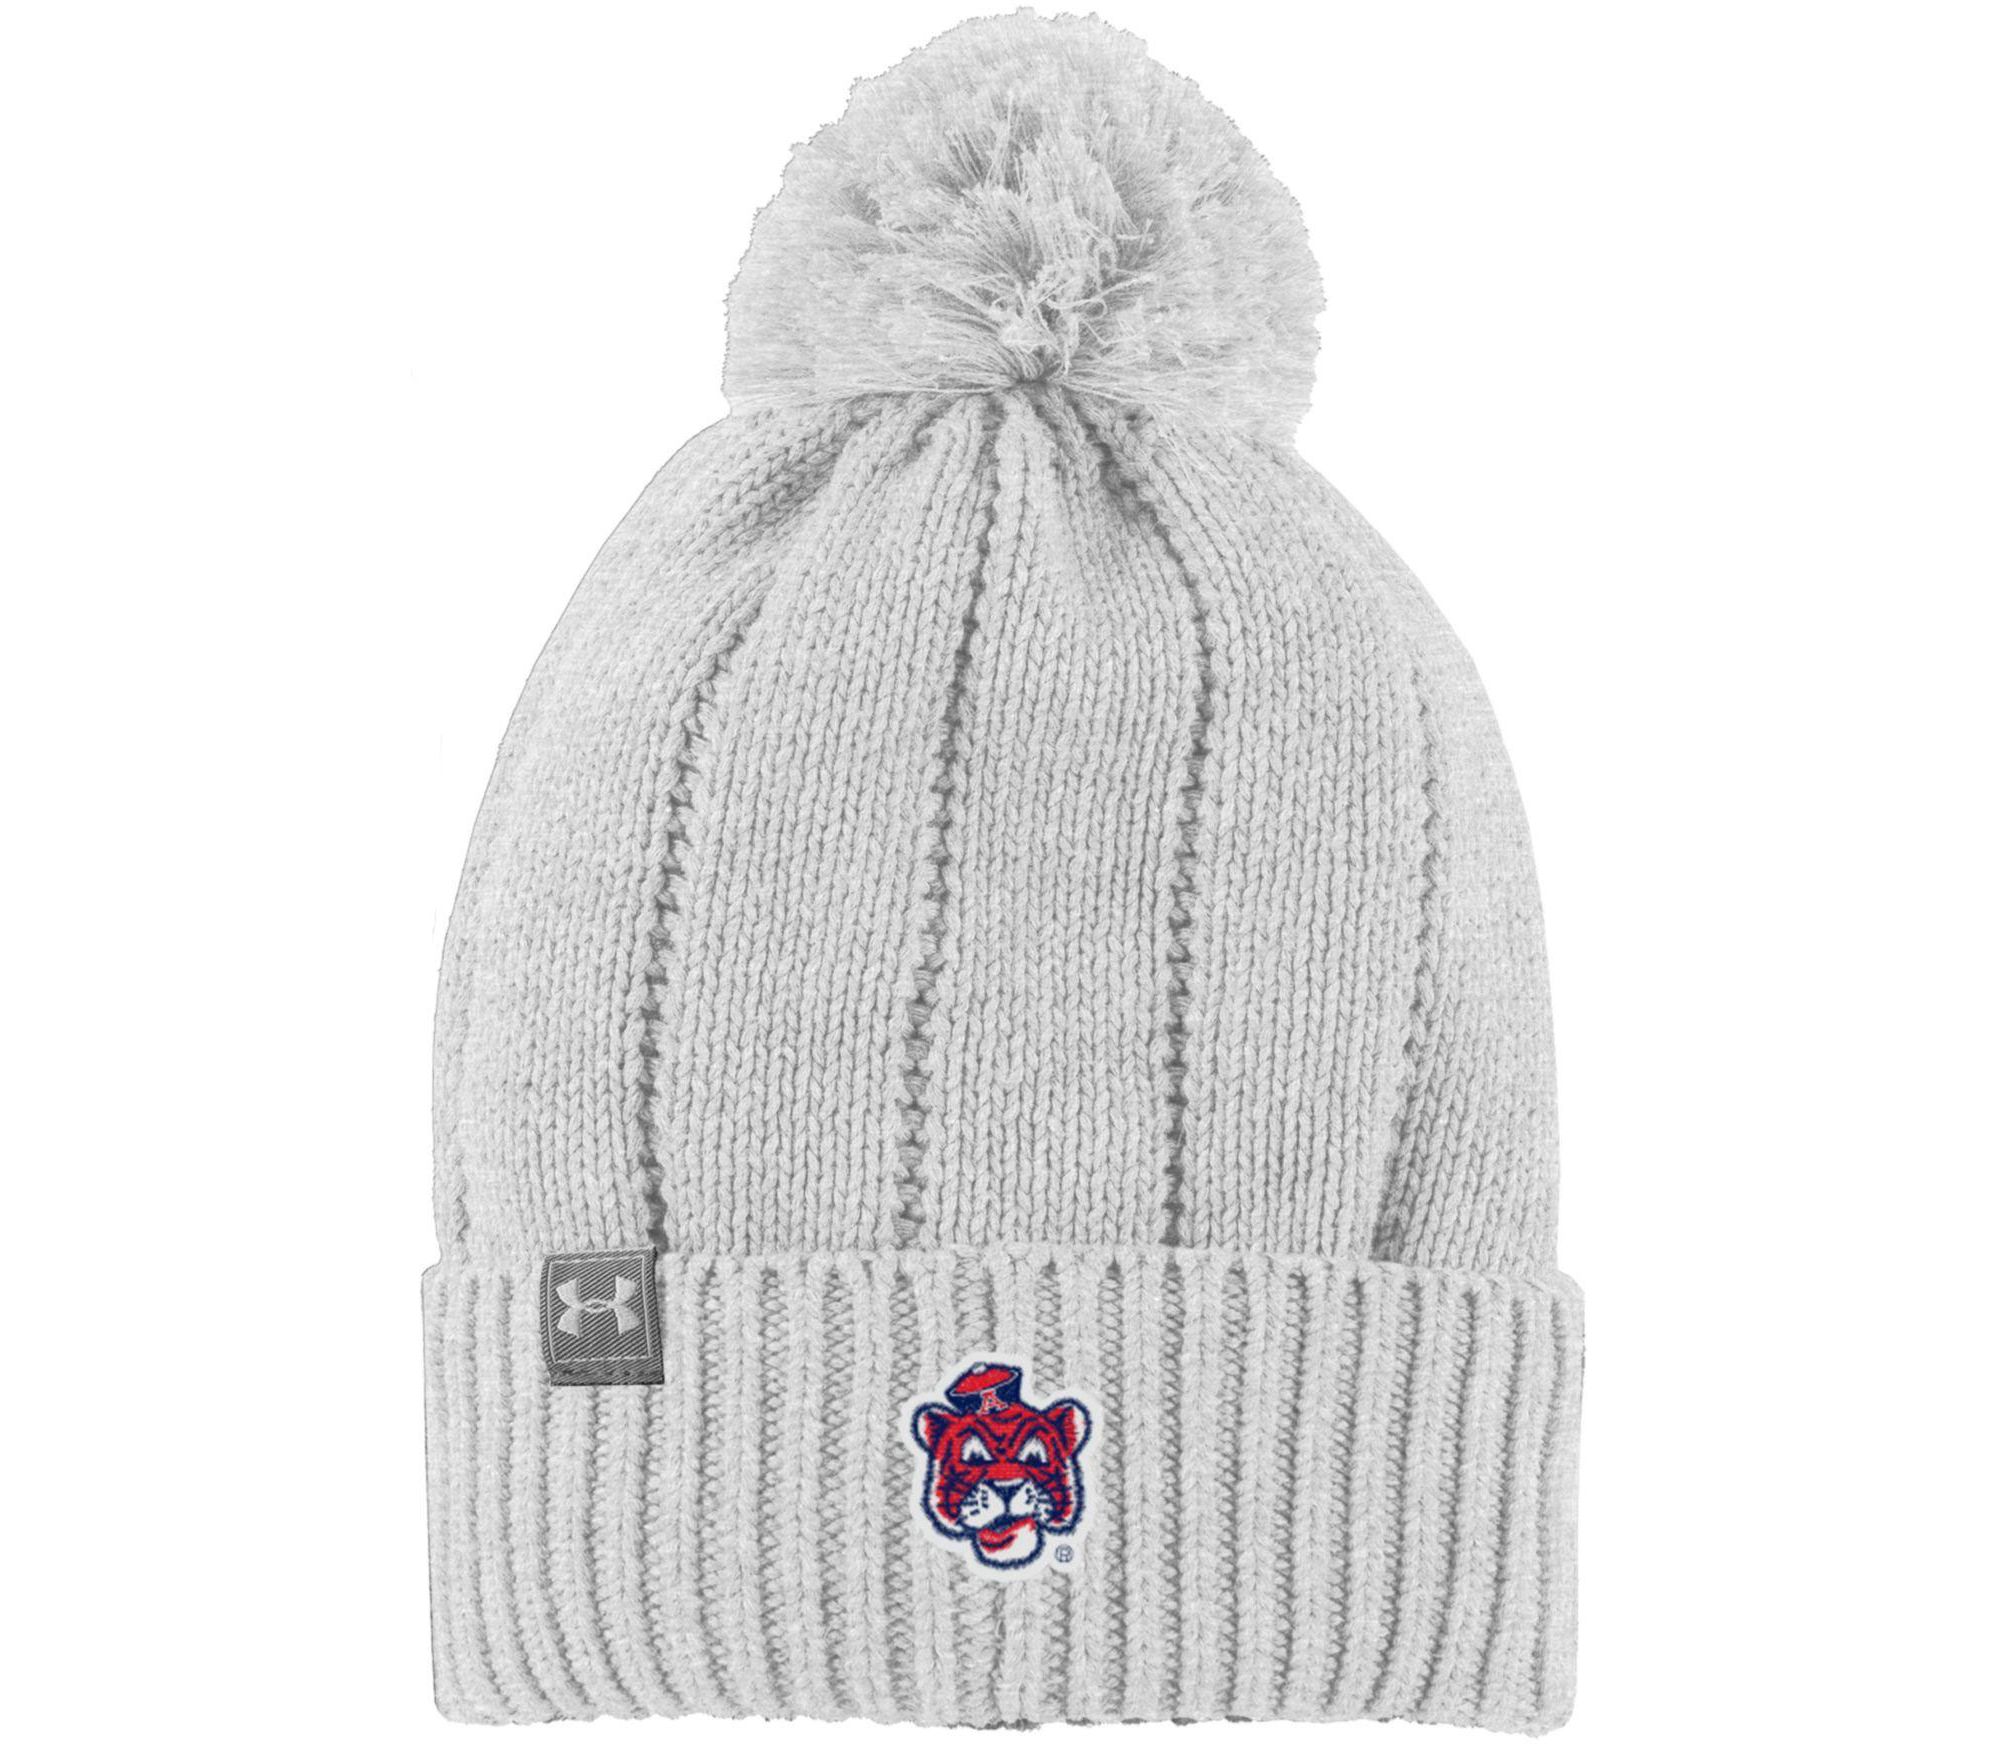 Under Armour Pom Knit Beanies: Women's Auburn Tigers (Silver Heather) $8.95, Men's (White) or Women's (Silver) Colorado State Rams $8.95 & More + Free Shipping on $49+